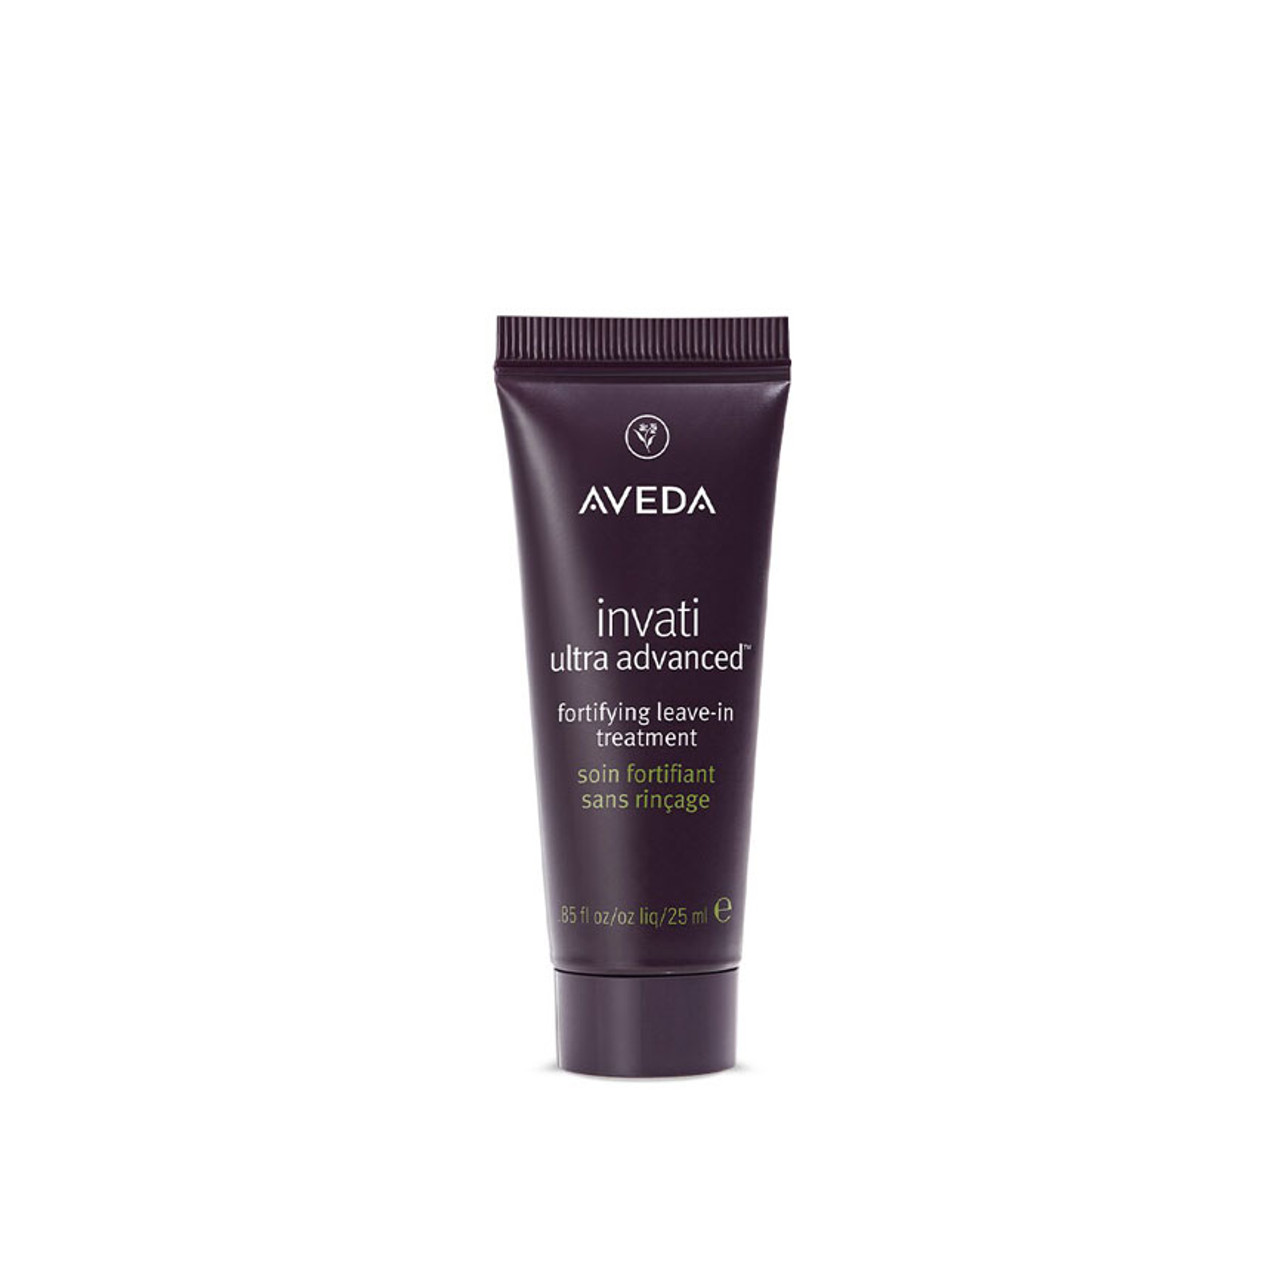 Aveda Invati Ultra Advanced™ Fortifying Leave-In Treatment 25ml Travel Size